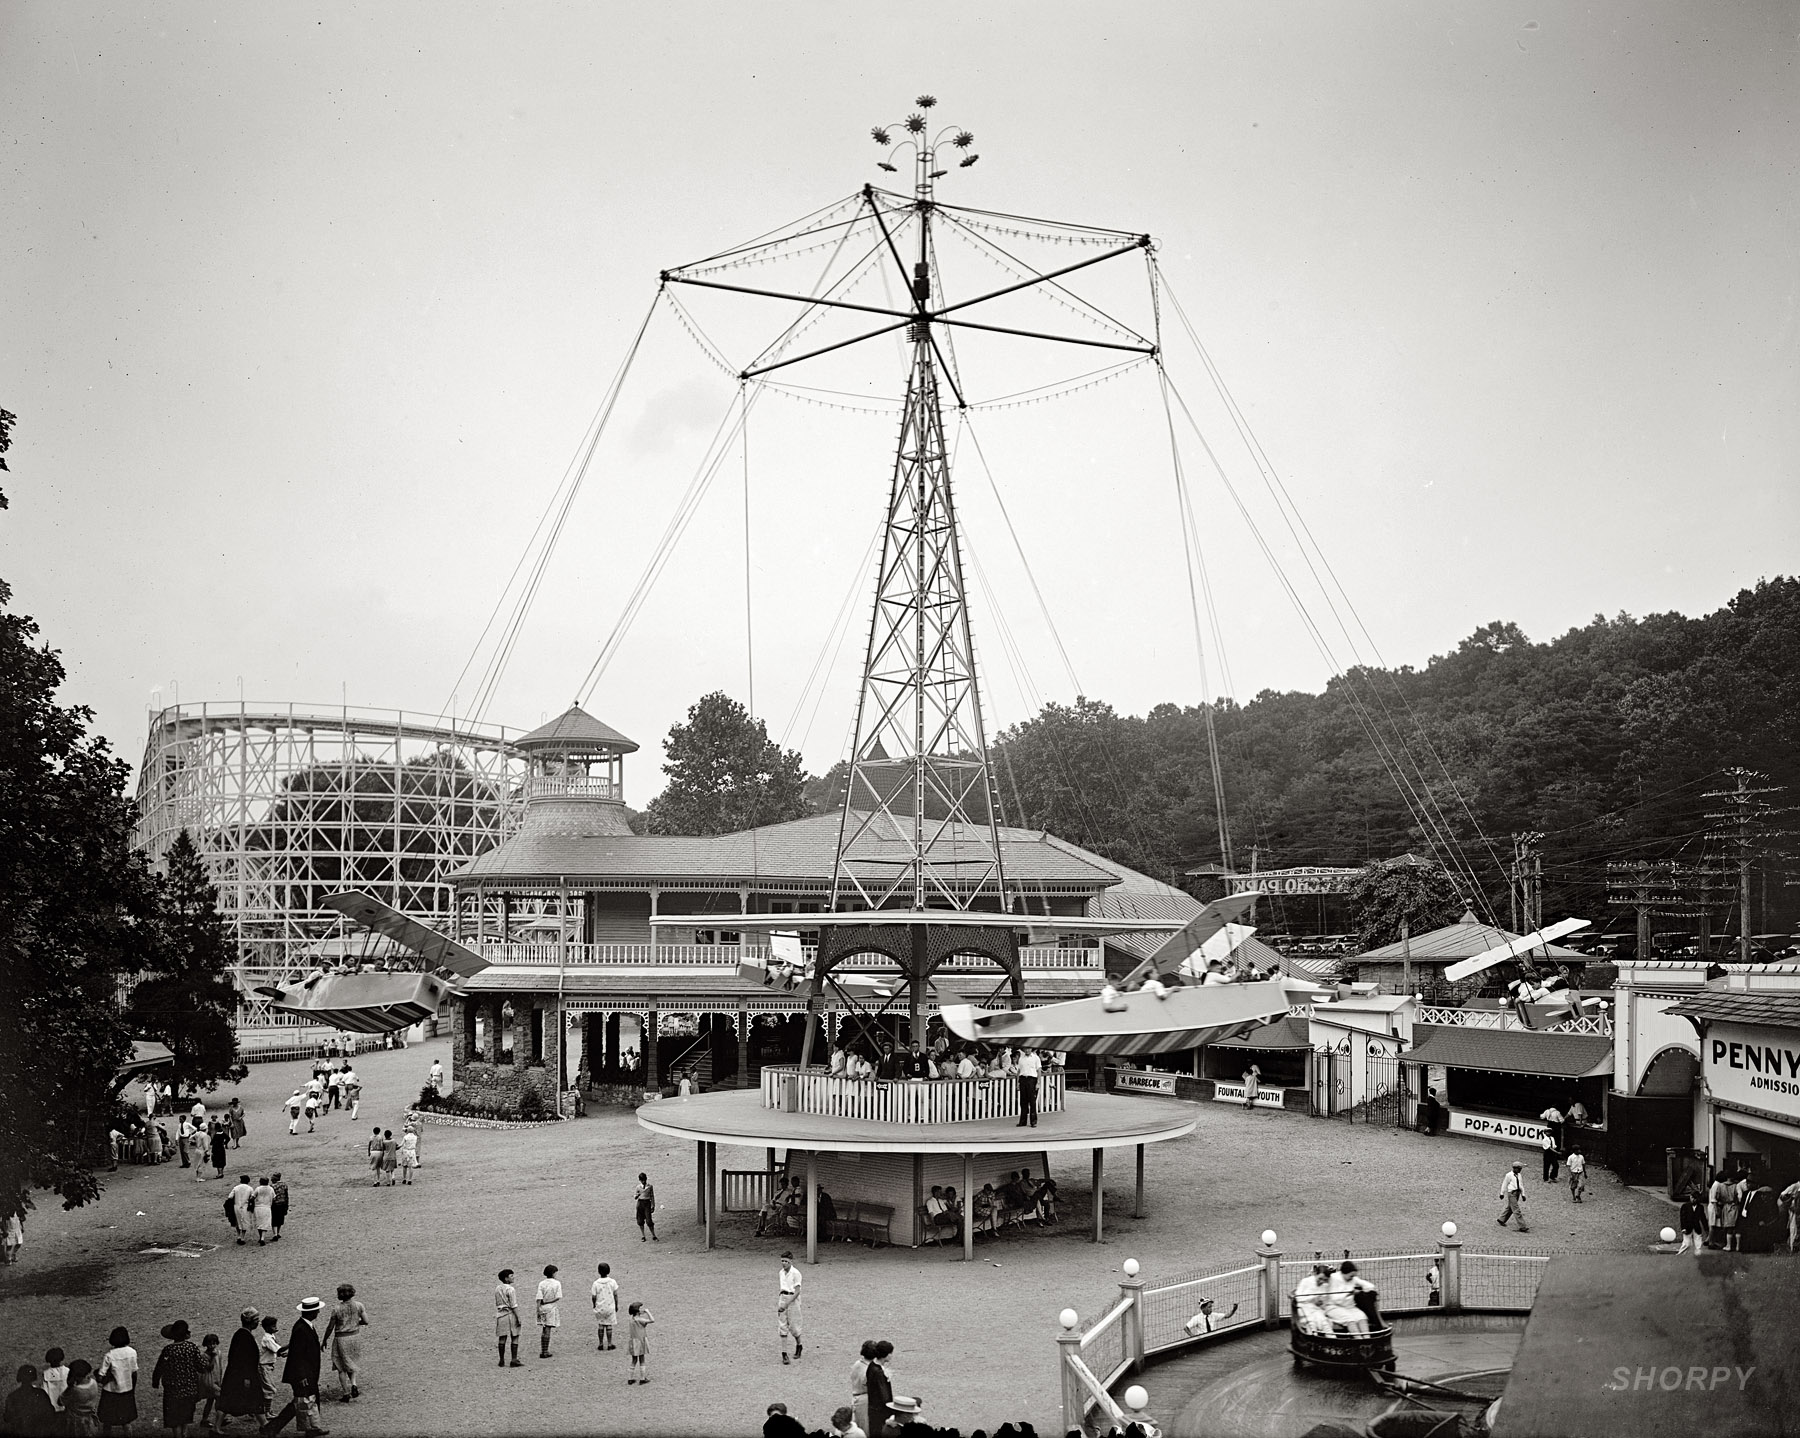 The "Aeroplane" ride at Glen Echo amusement park in Montgomery County, Maryland, circa 1928. View full size. National Photo Company glass negative.